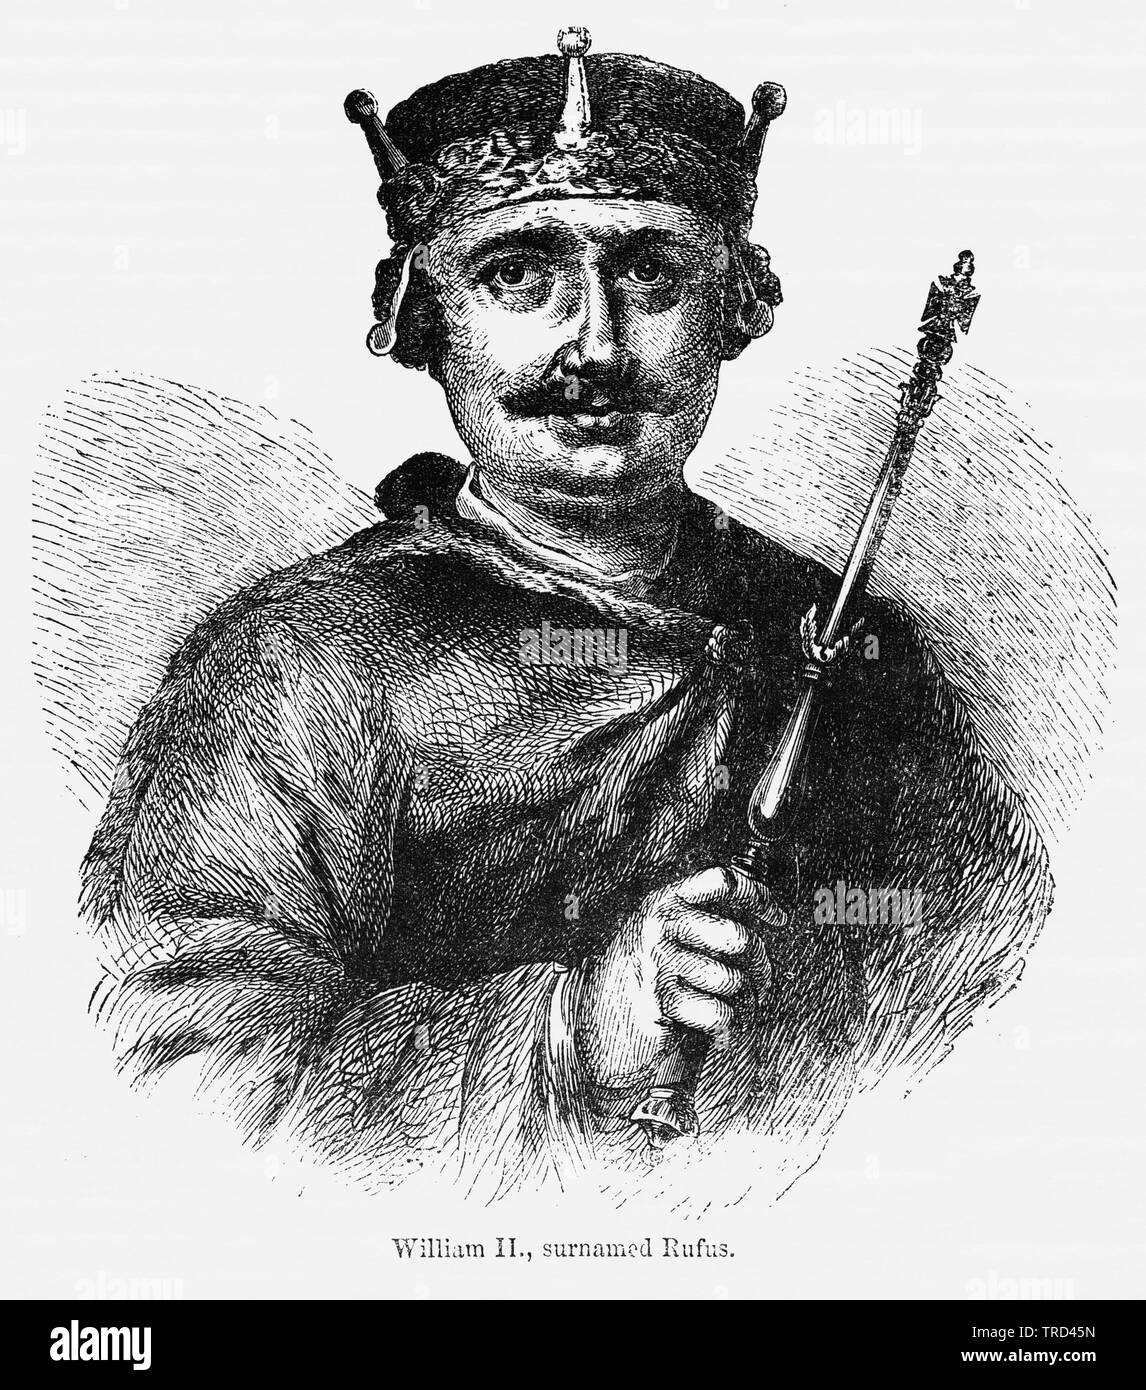 William II., surnamed Rufus, Illustration from John Cassell's Illustrated History of England, Vol. I from the earliest period to the reign of Edward the Fourth, Cassell, Petter and Galpin, 1857 Stock Photo